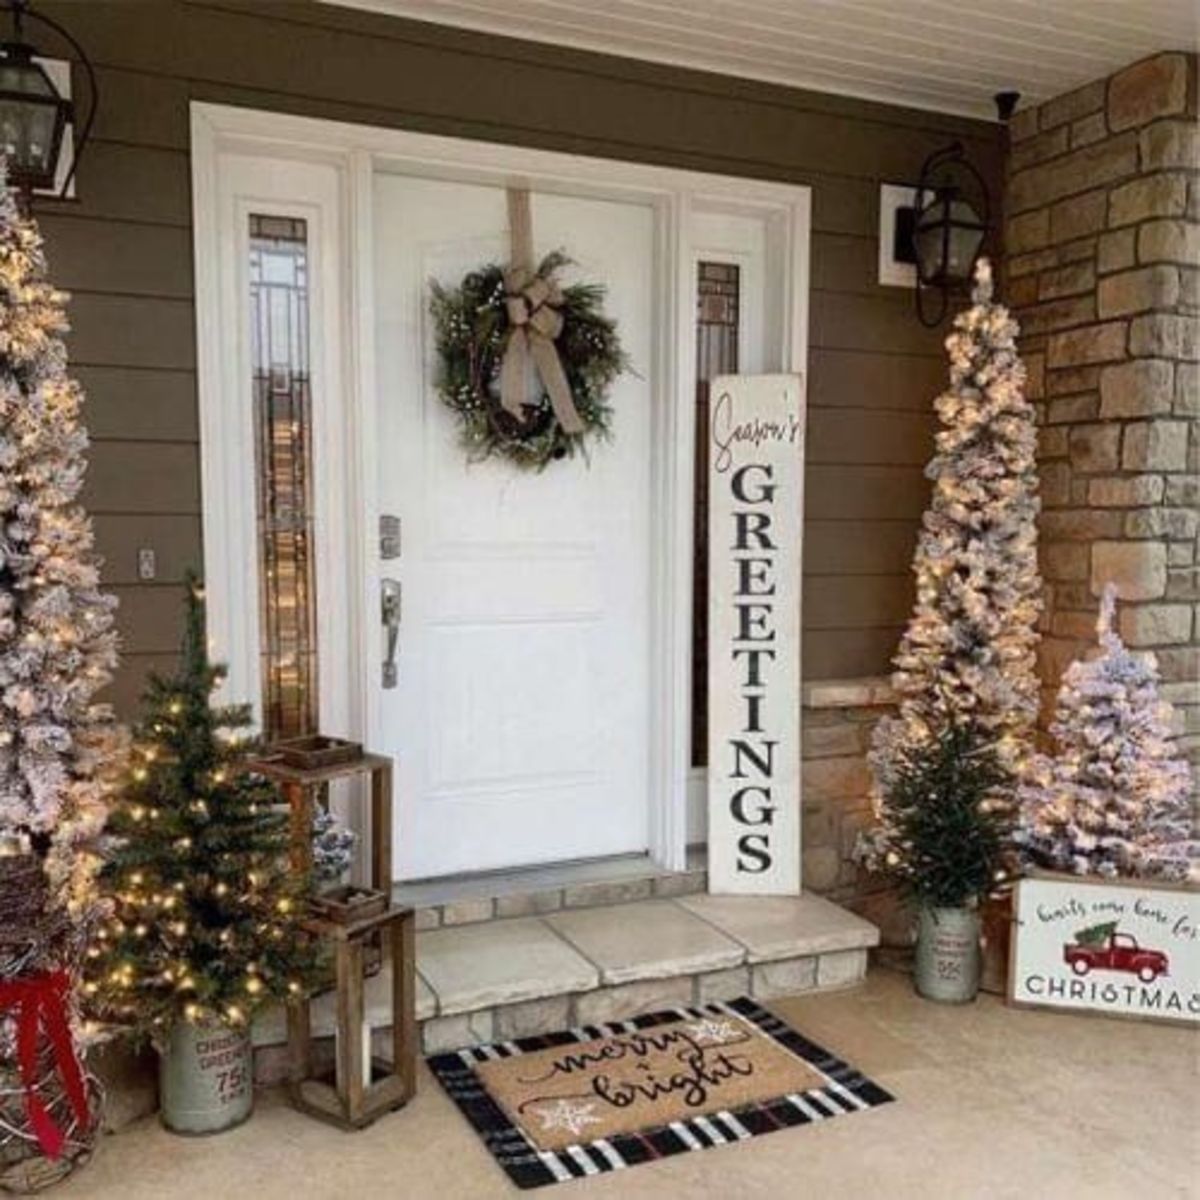 Add a rustic sign with different sizes of Christmas trees.